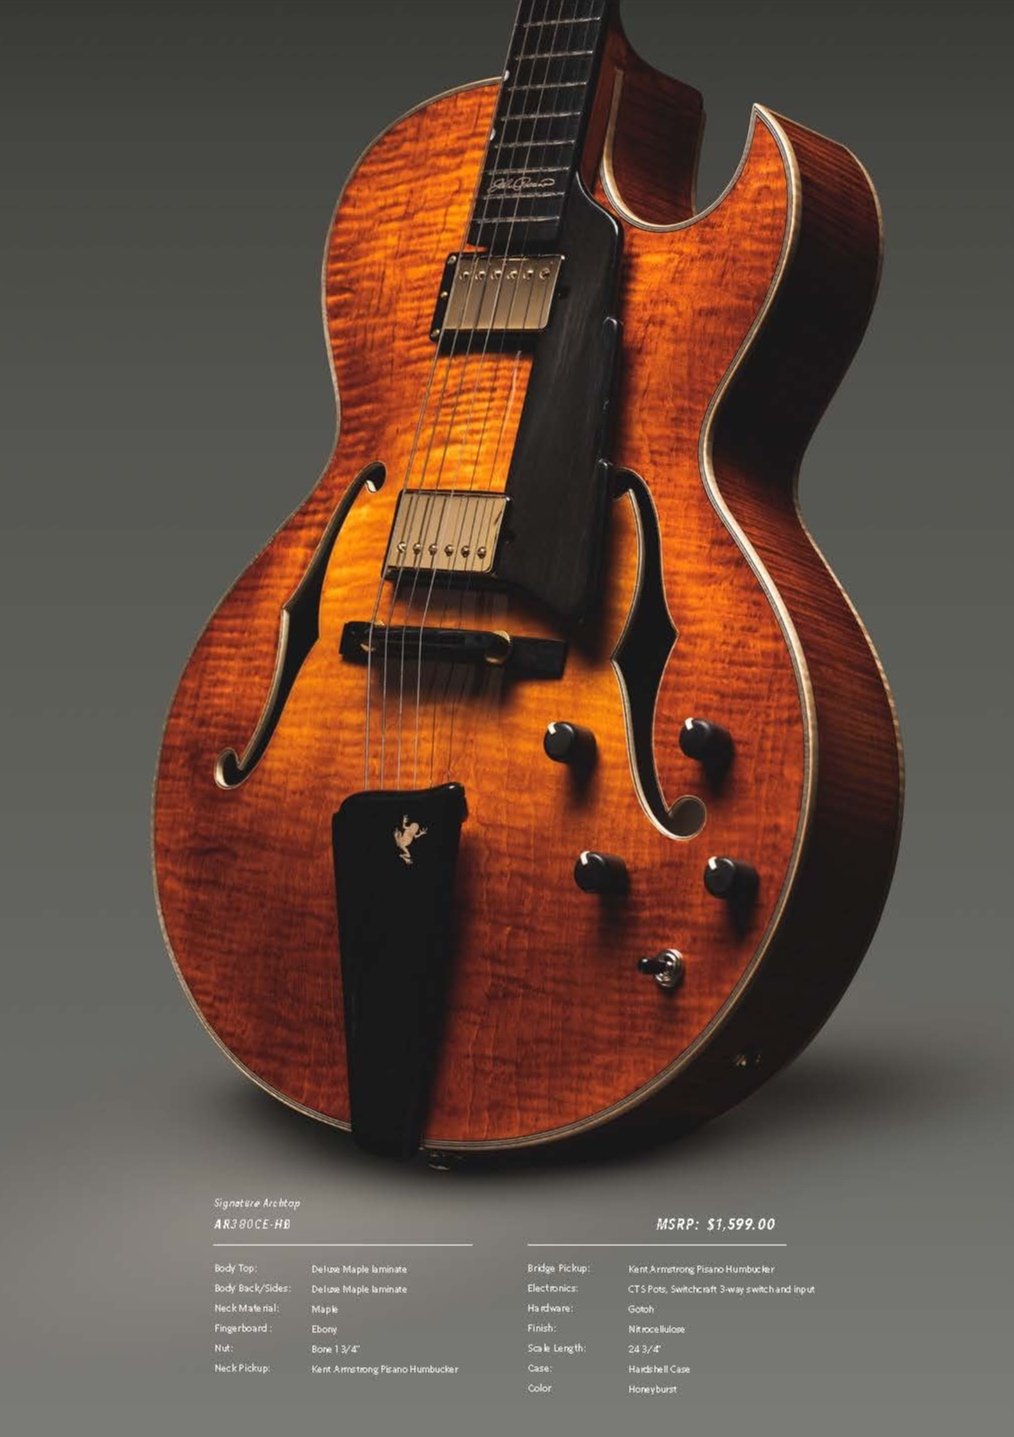 James Sullivan Photography for Eastman Music, Signature Archtop Guitar